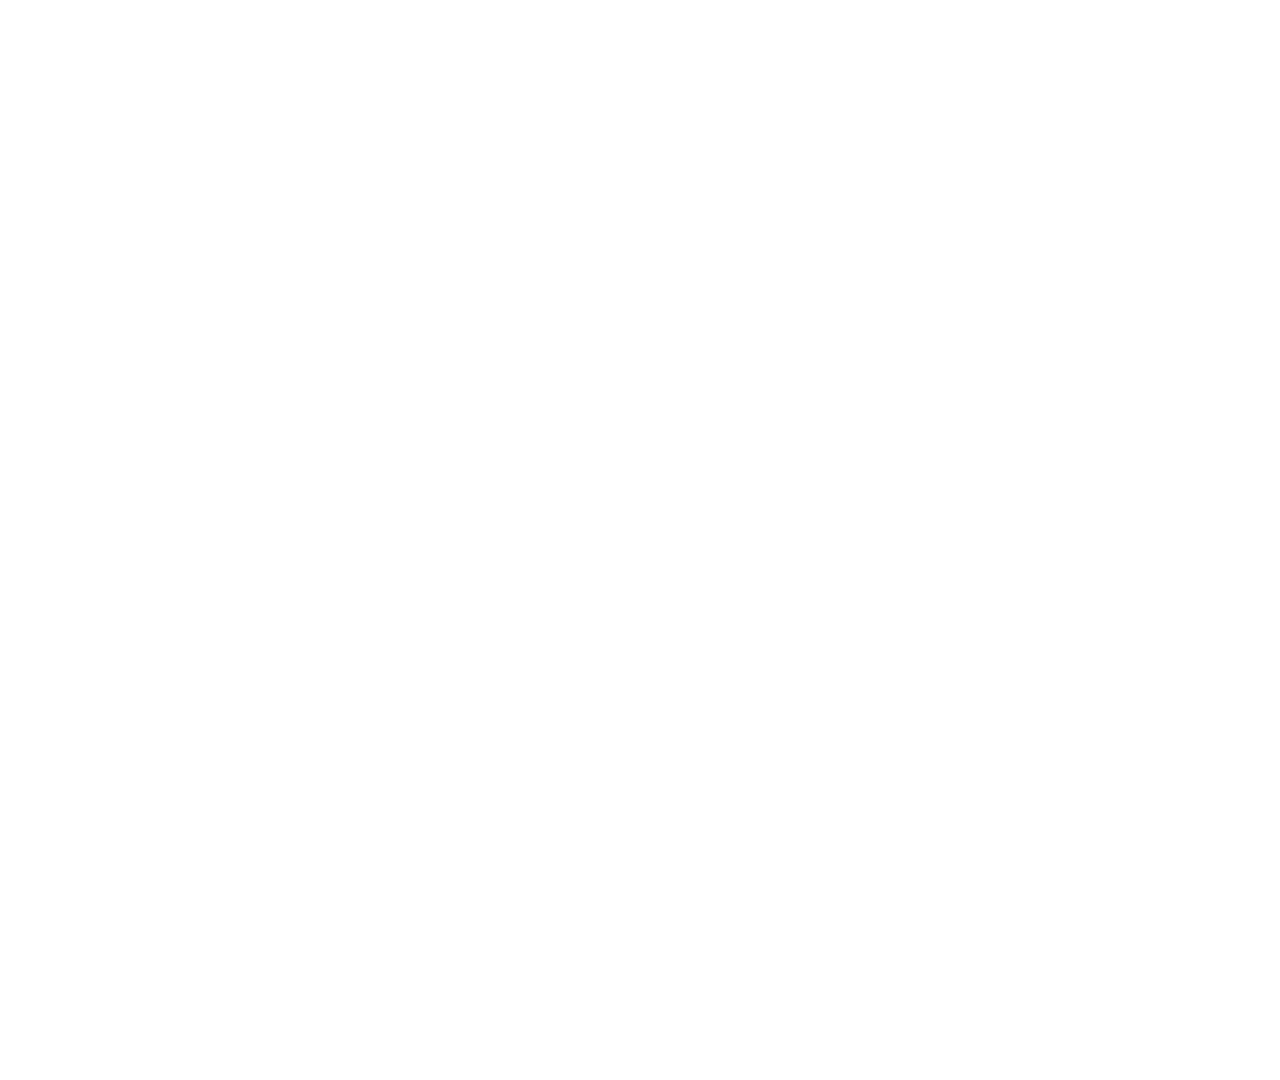 An Odyssey to the Castle of Vampires